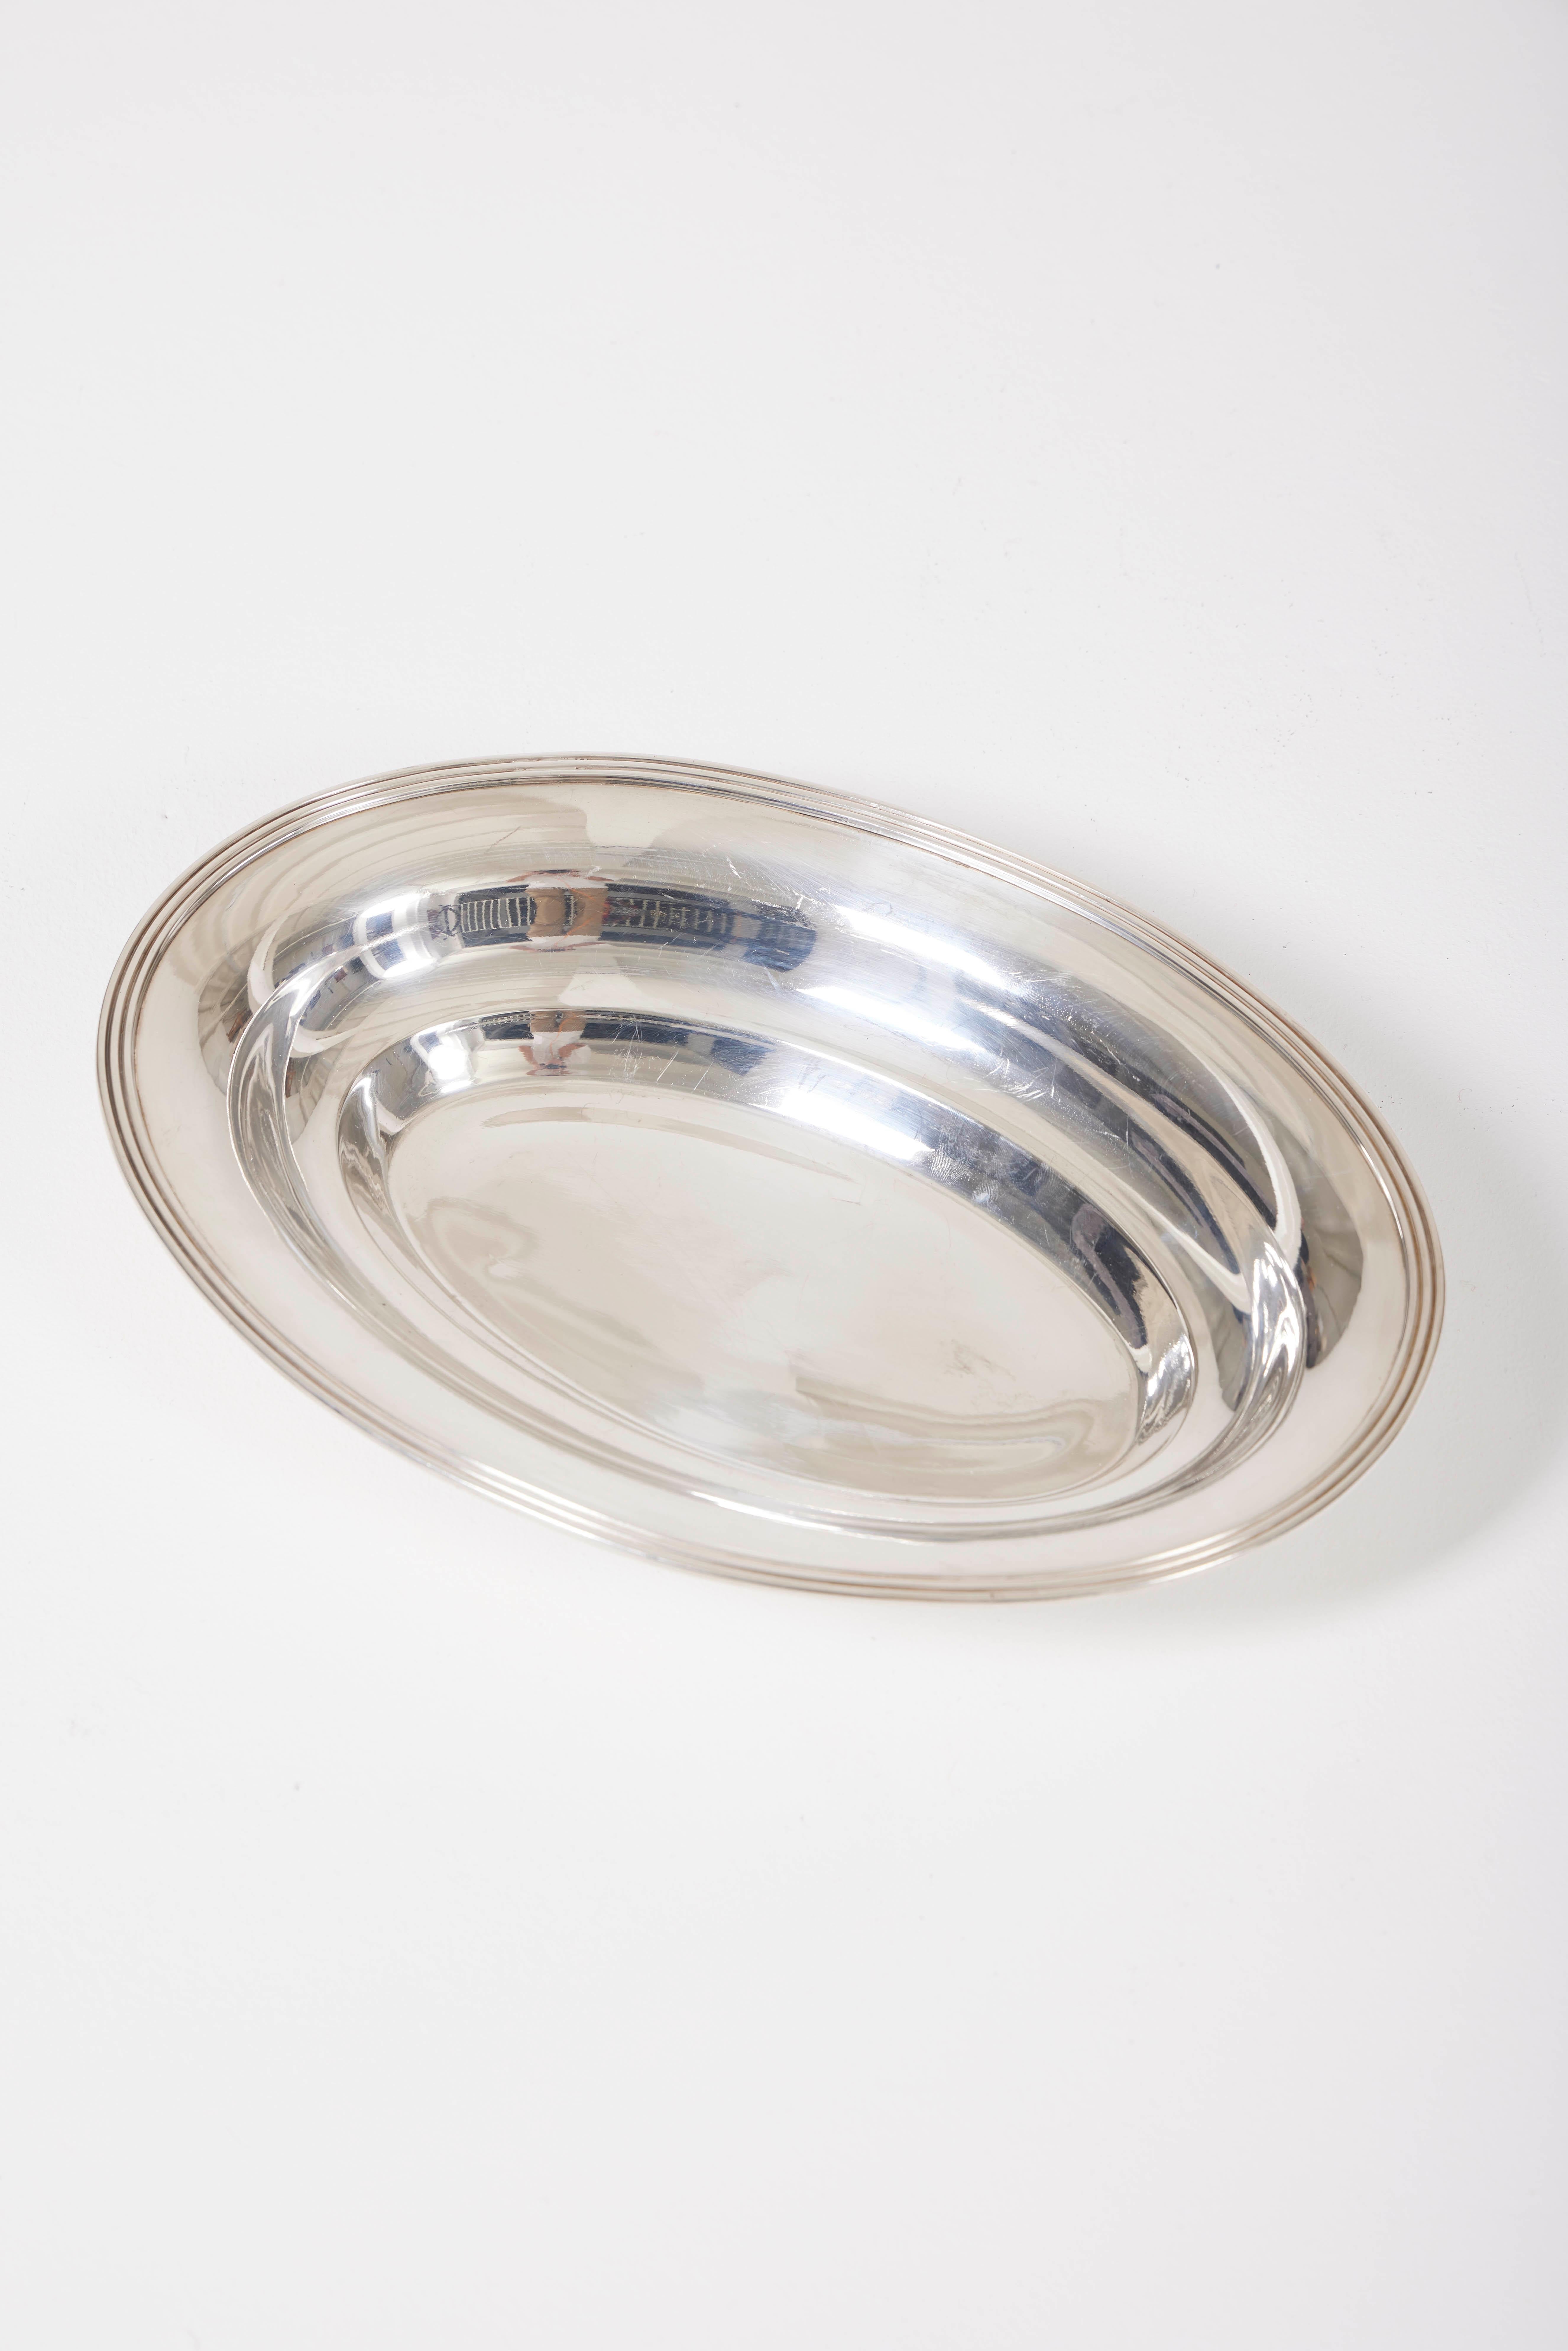 Oval silver-plated serving dish. Very good condition.
LP1930